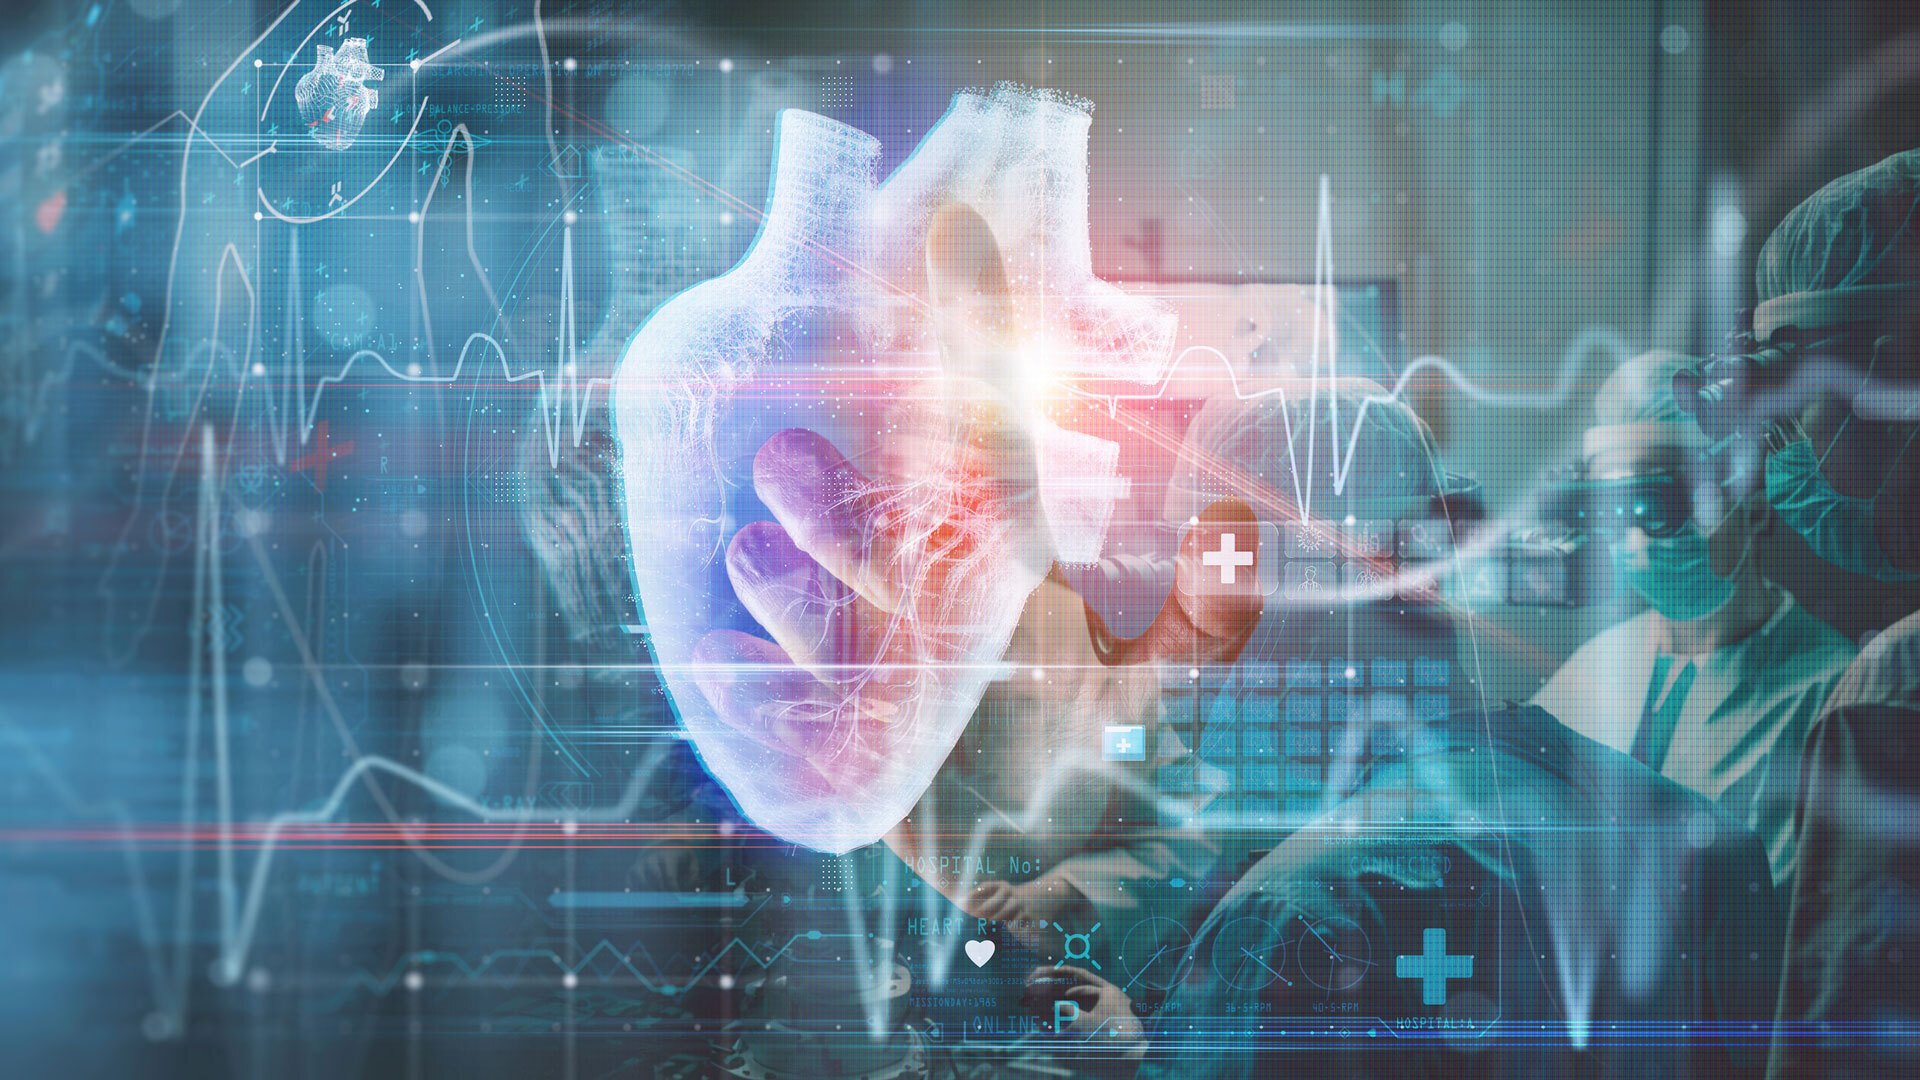 Featured image: Artist rendering of an anatomical heart and technology - Read full post: Predicting the Future: A Five-Year Look Ahead at Remote Monitoring